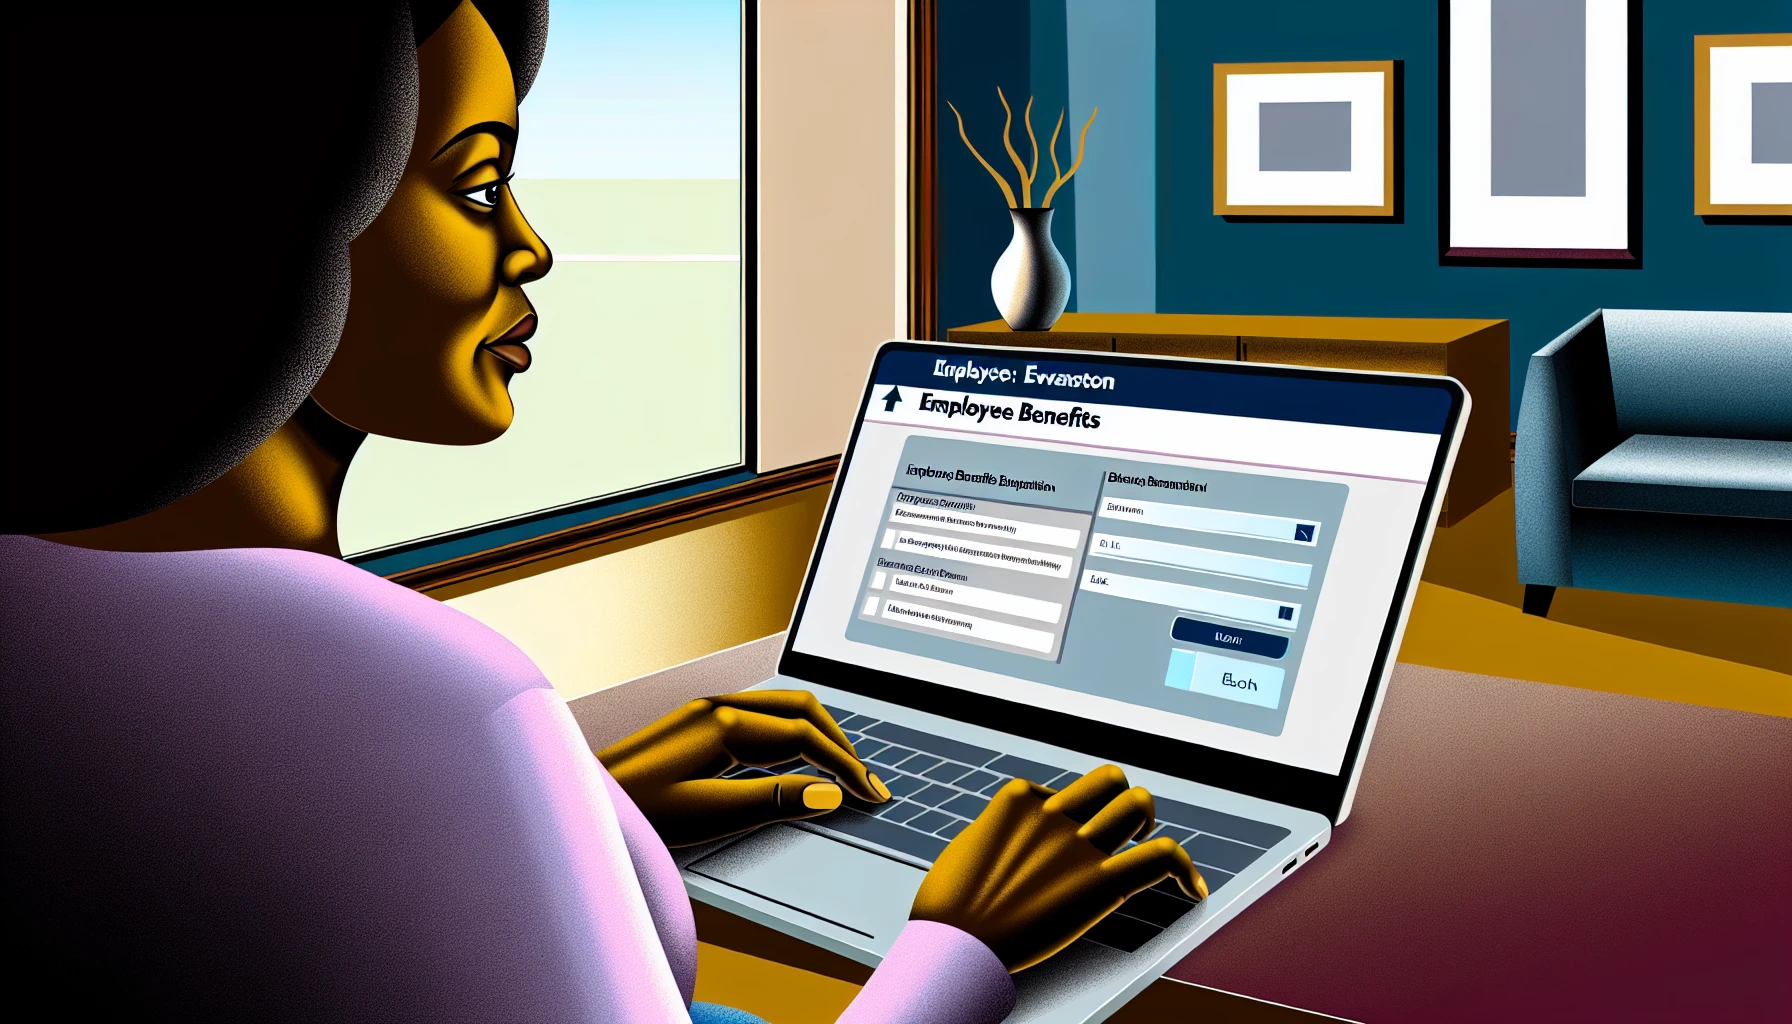 A person accessing employee benefits through an online portal in Evanston, IL